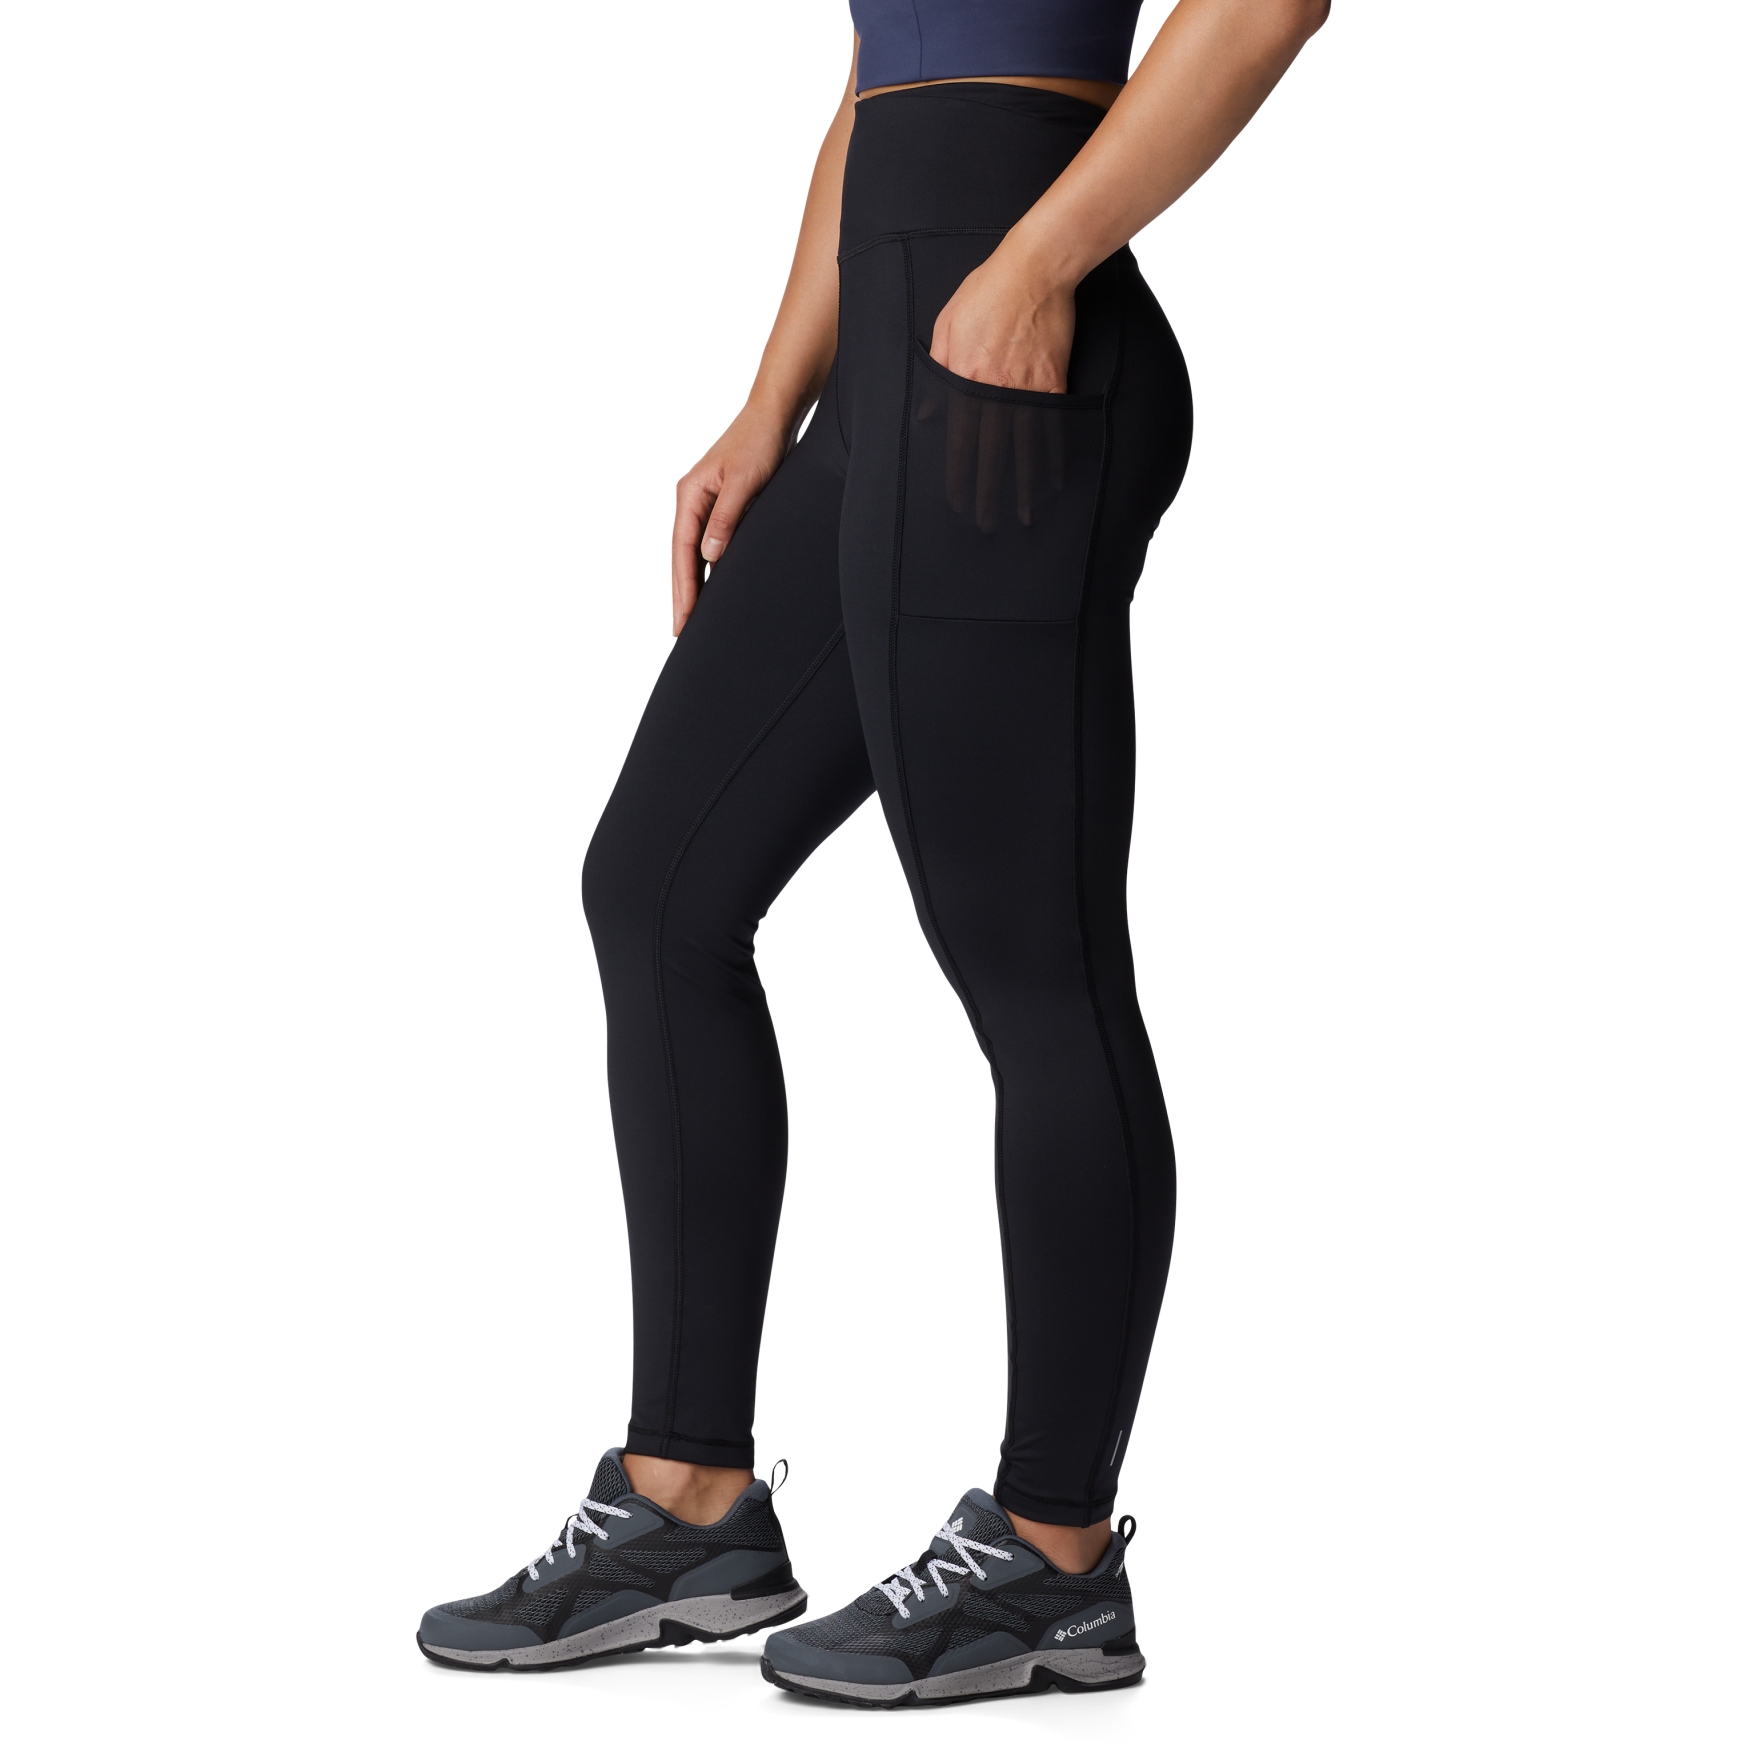 Columbia Endless Trail 7/8 running tights for women - Soccer Sport Fitness